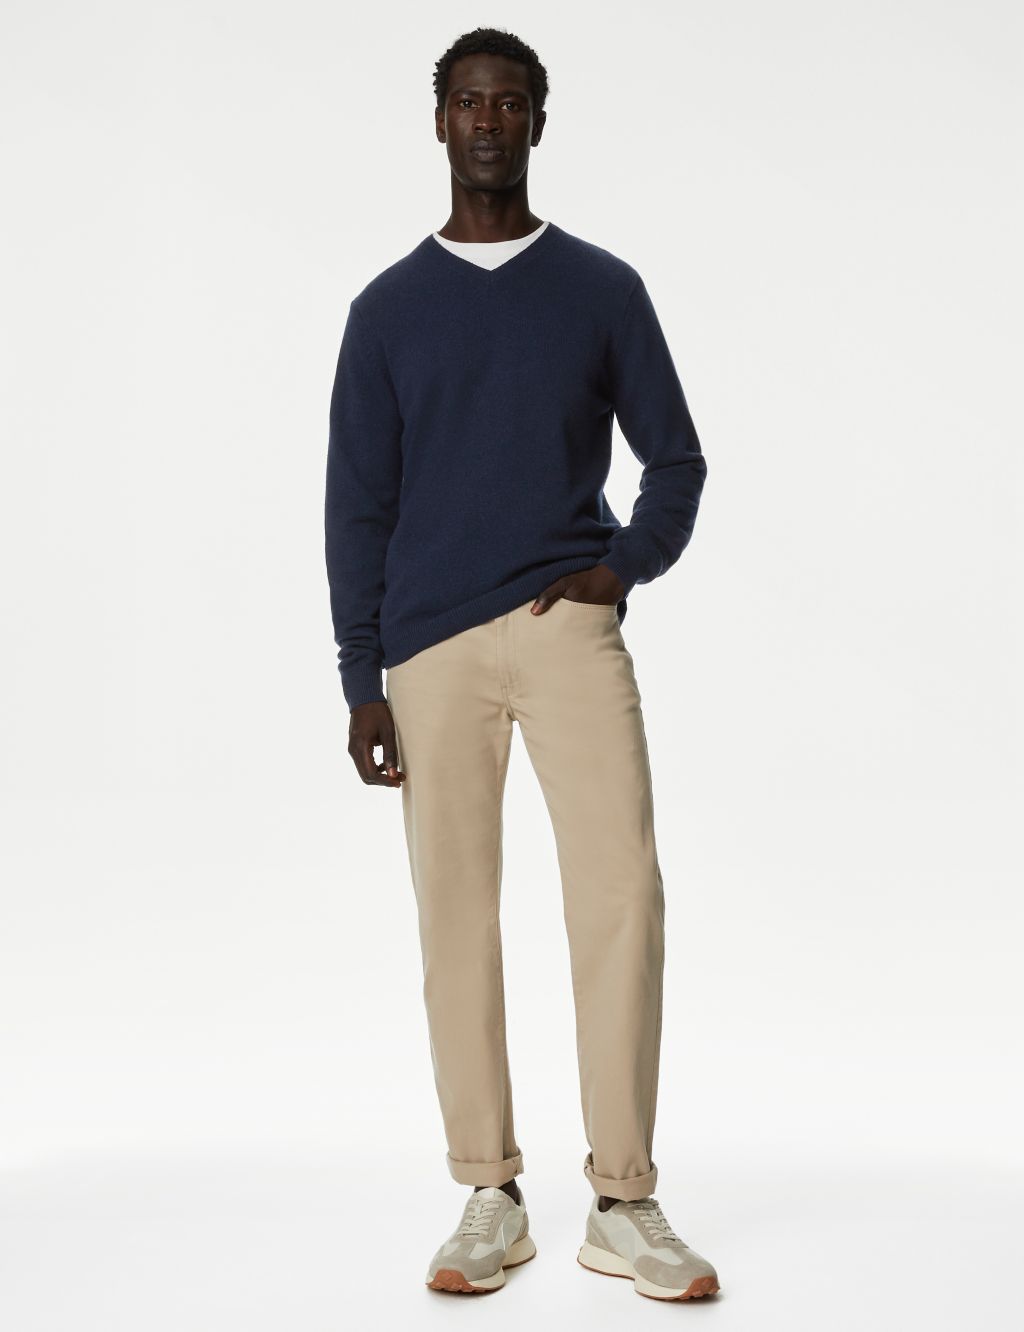 Pure Extra Fine Lambswool V-Neck Jumper image 2